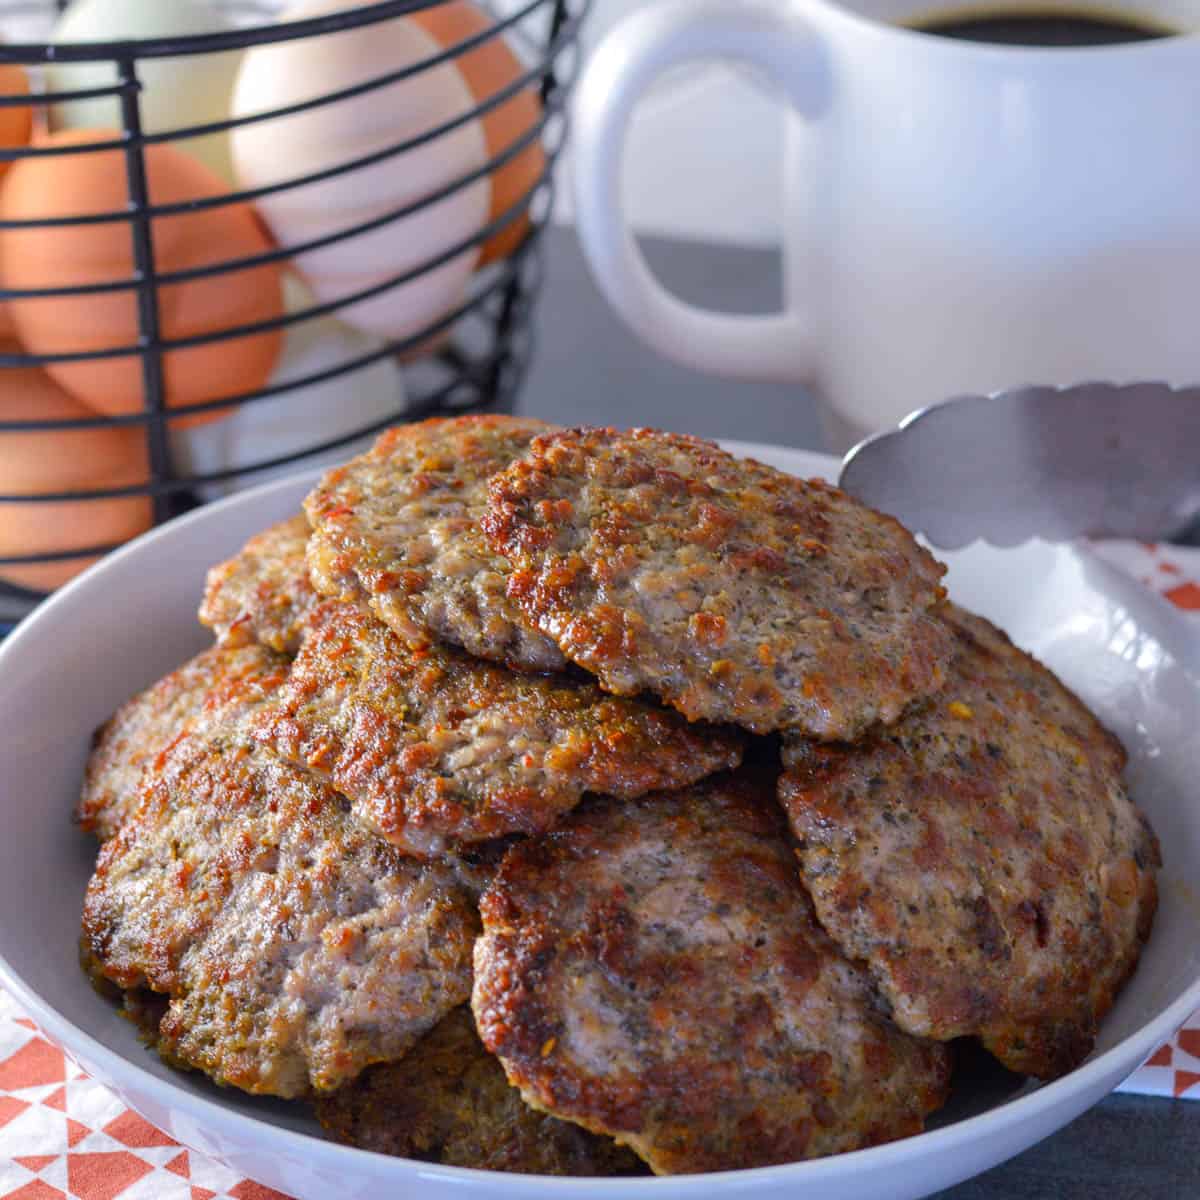 Stack of country breakfast sausage patties in a white serving bowl in red and white napkin with silver tongs, white coffee mug and basket of fresh eggs in background